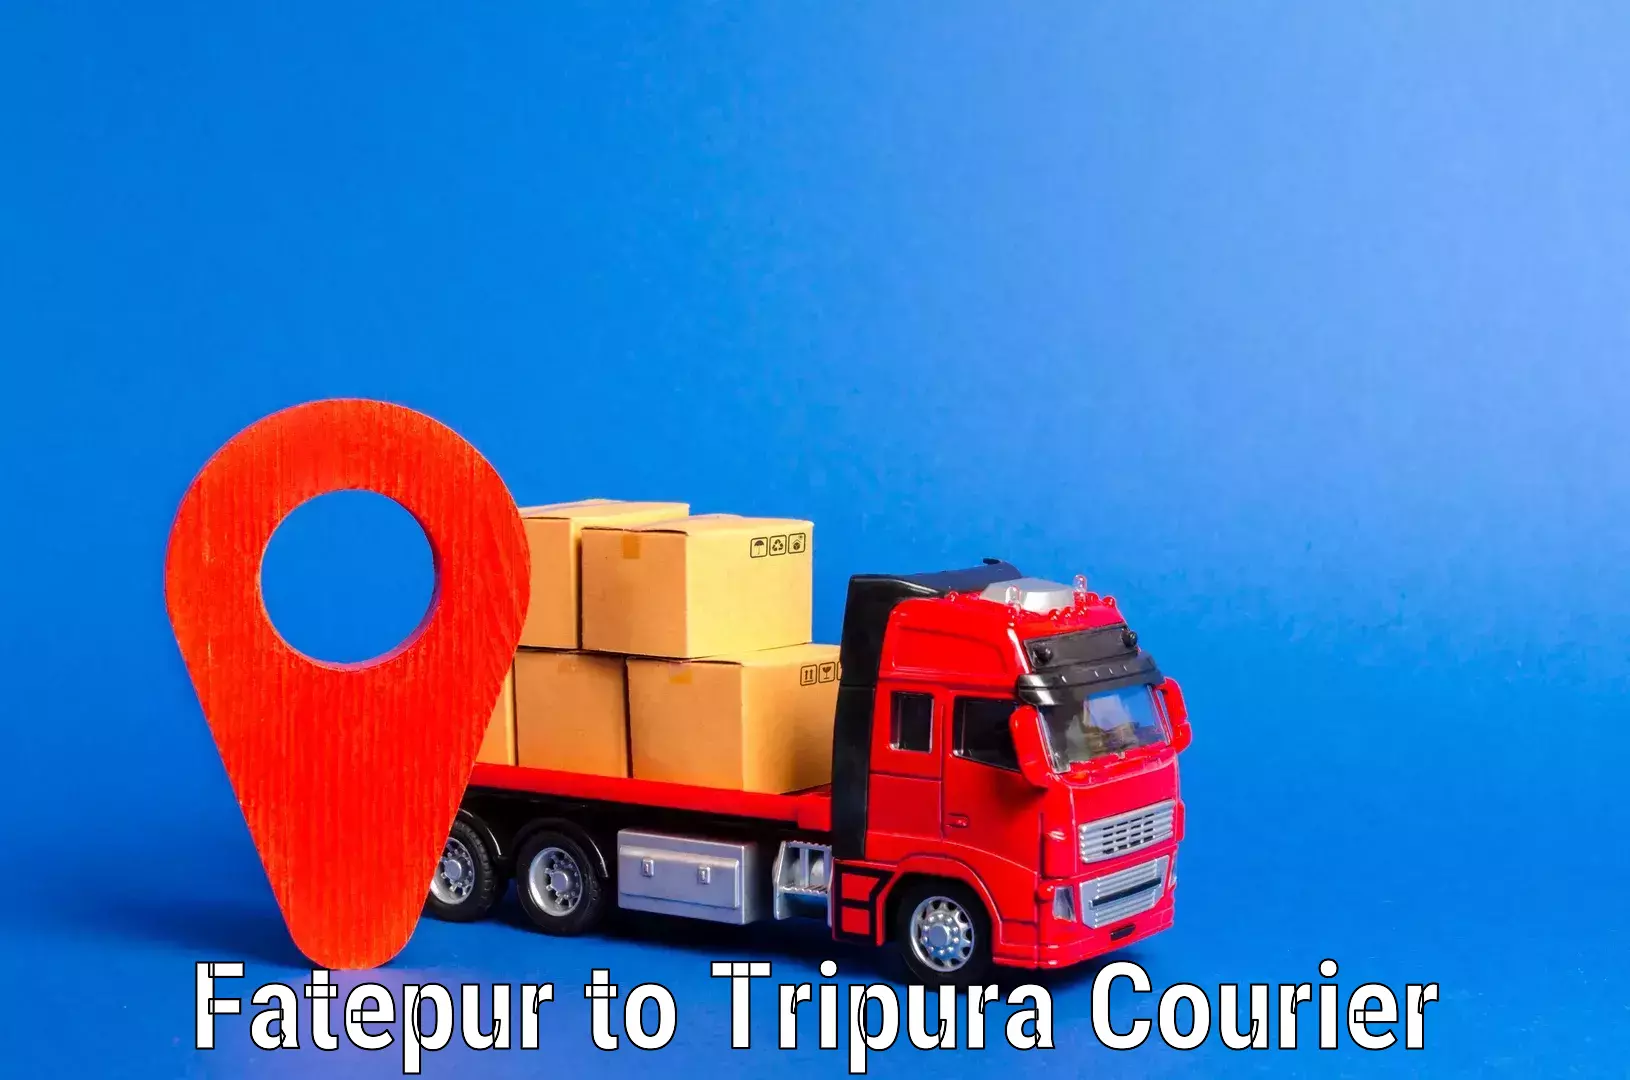 Household moving experts Fatepur to Tripura